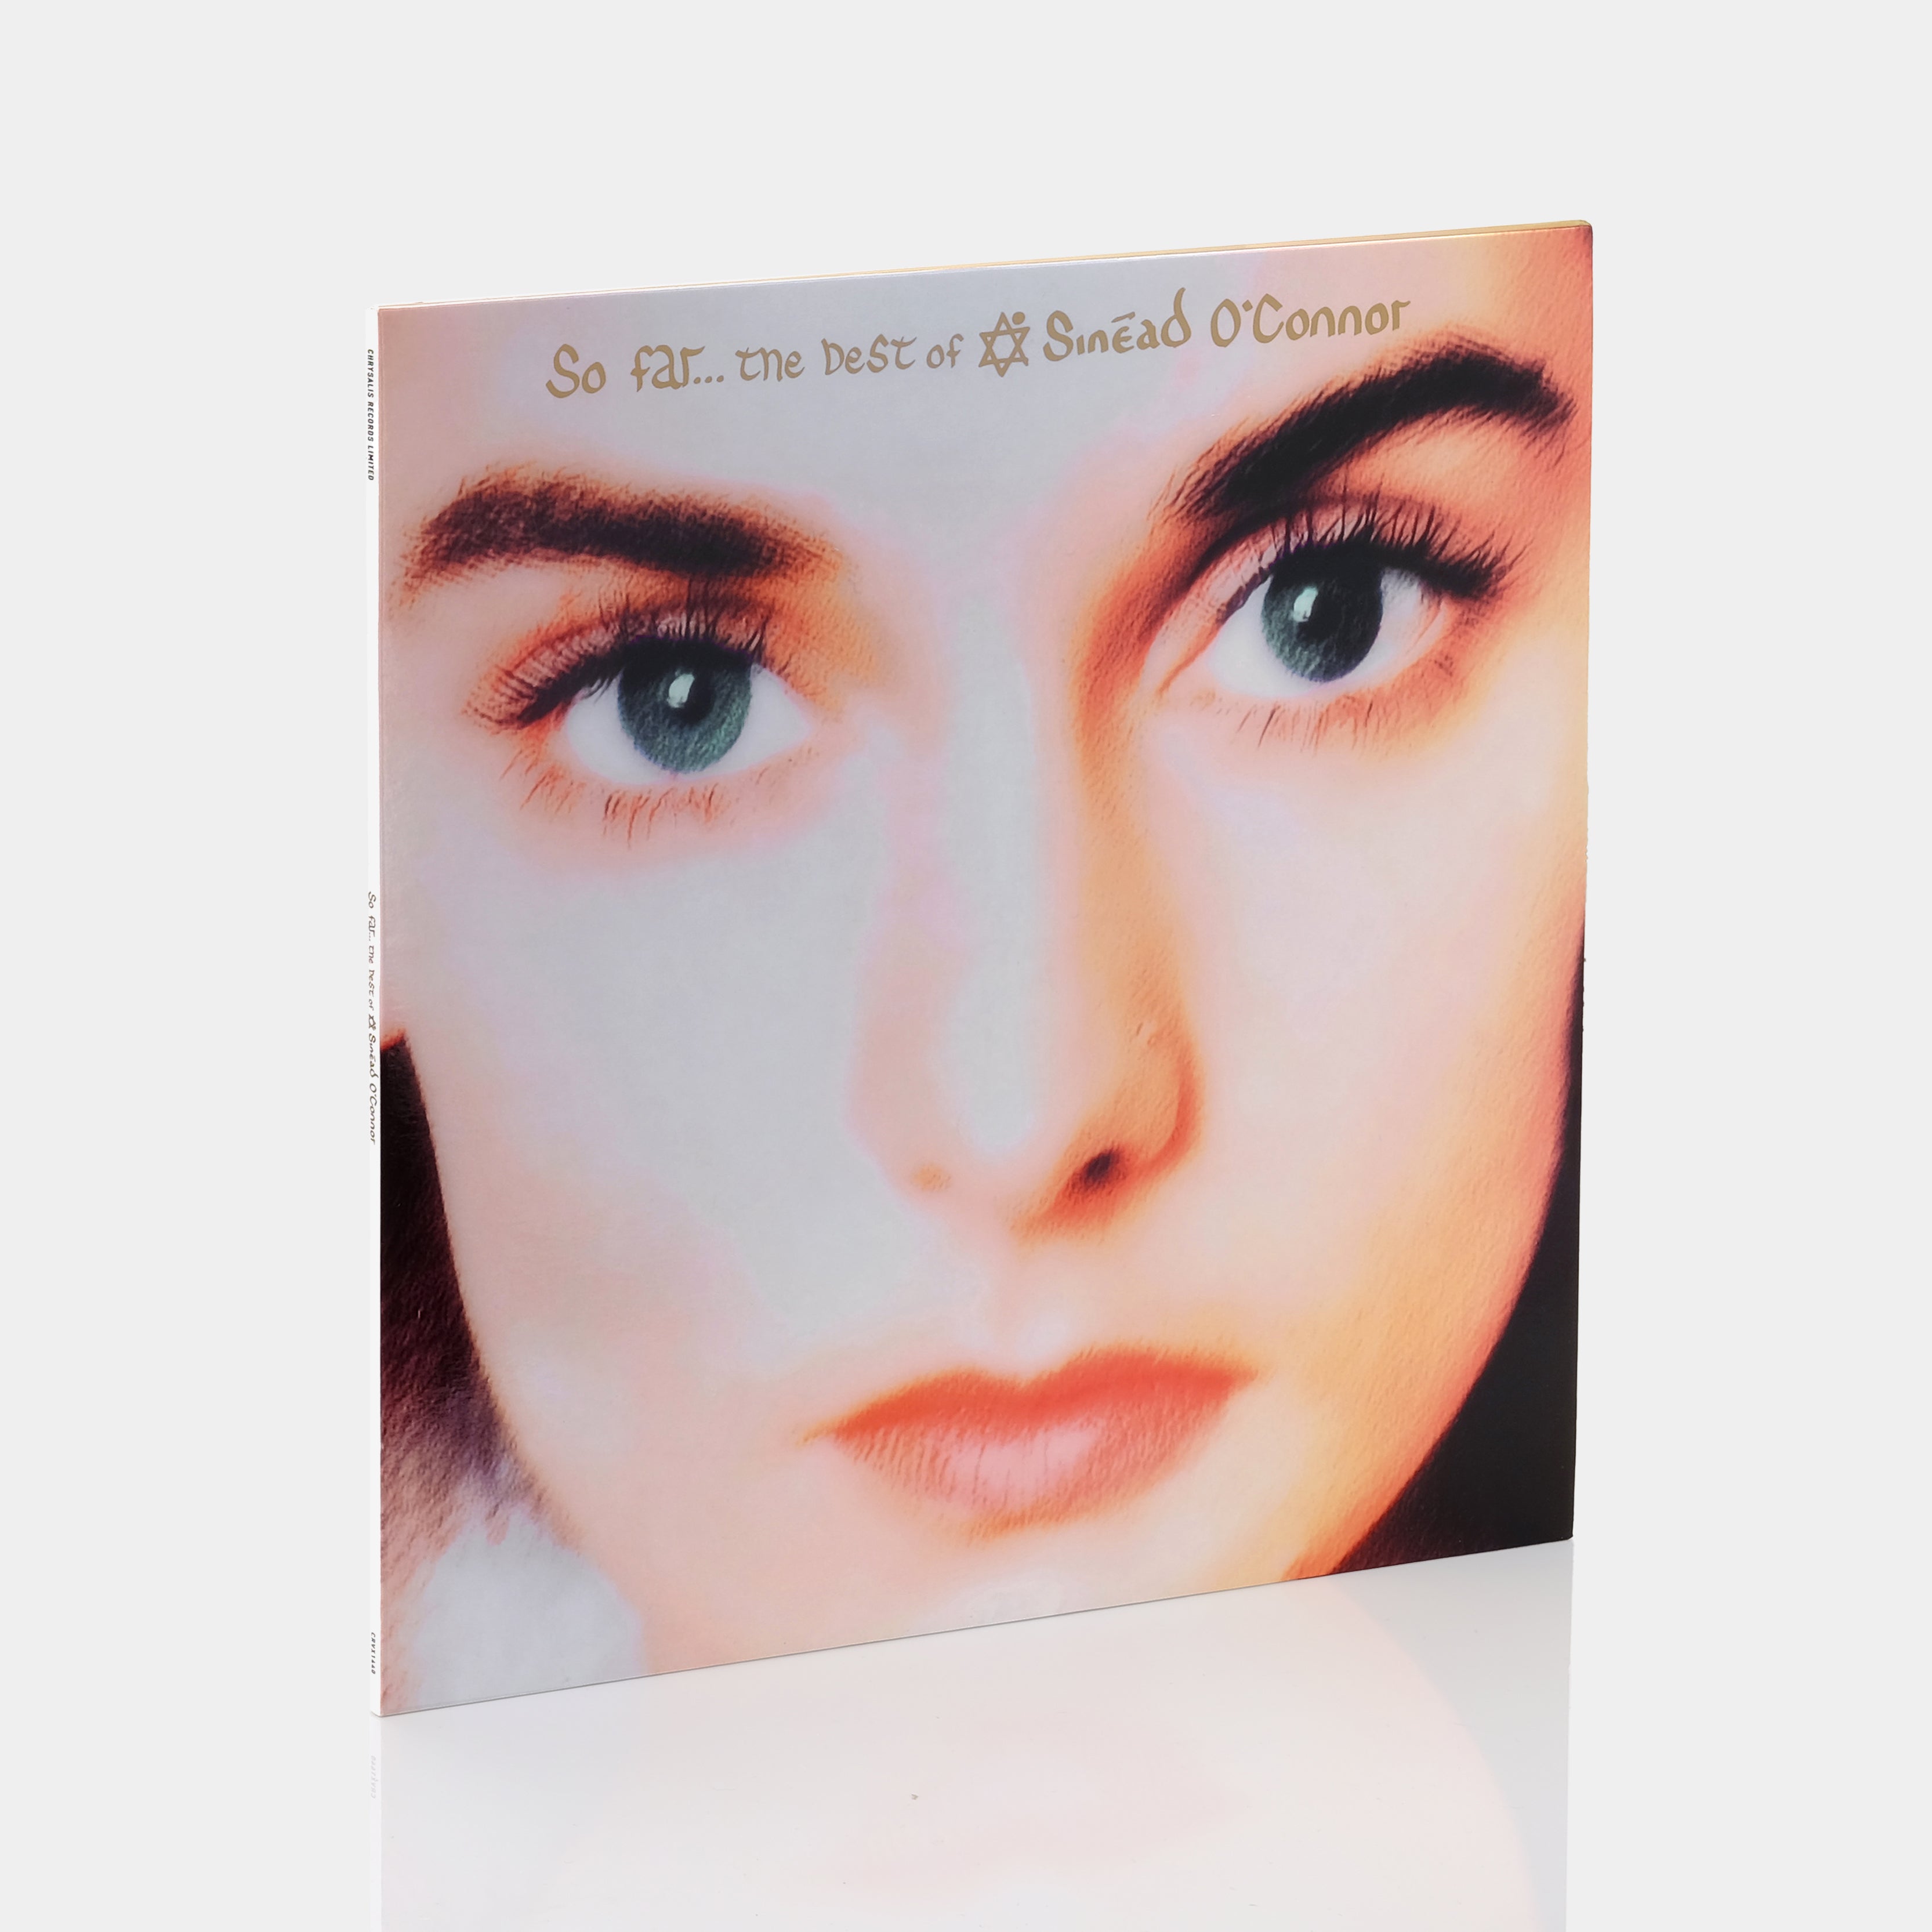 Sinéad O'Connor - So Far… The Best Of Sinéad O'Connor 2xLP Transparent Champagne Vinyl Record